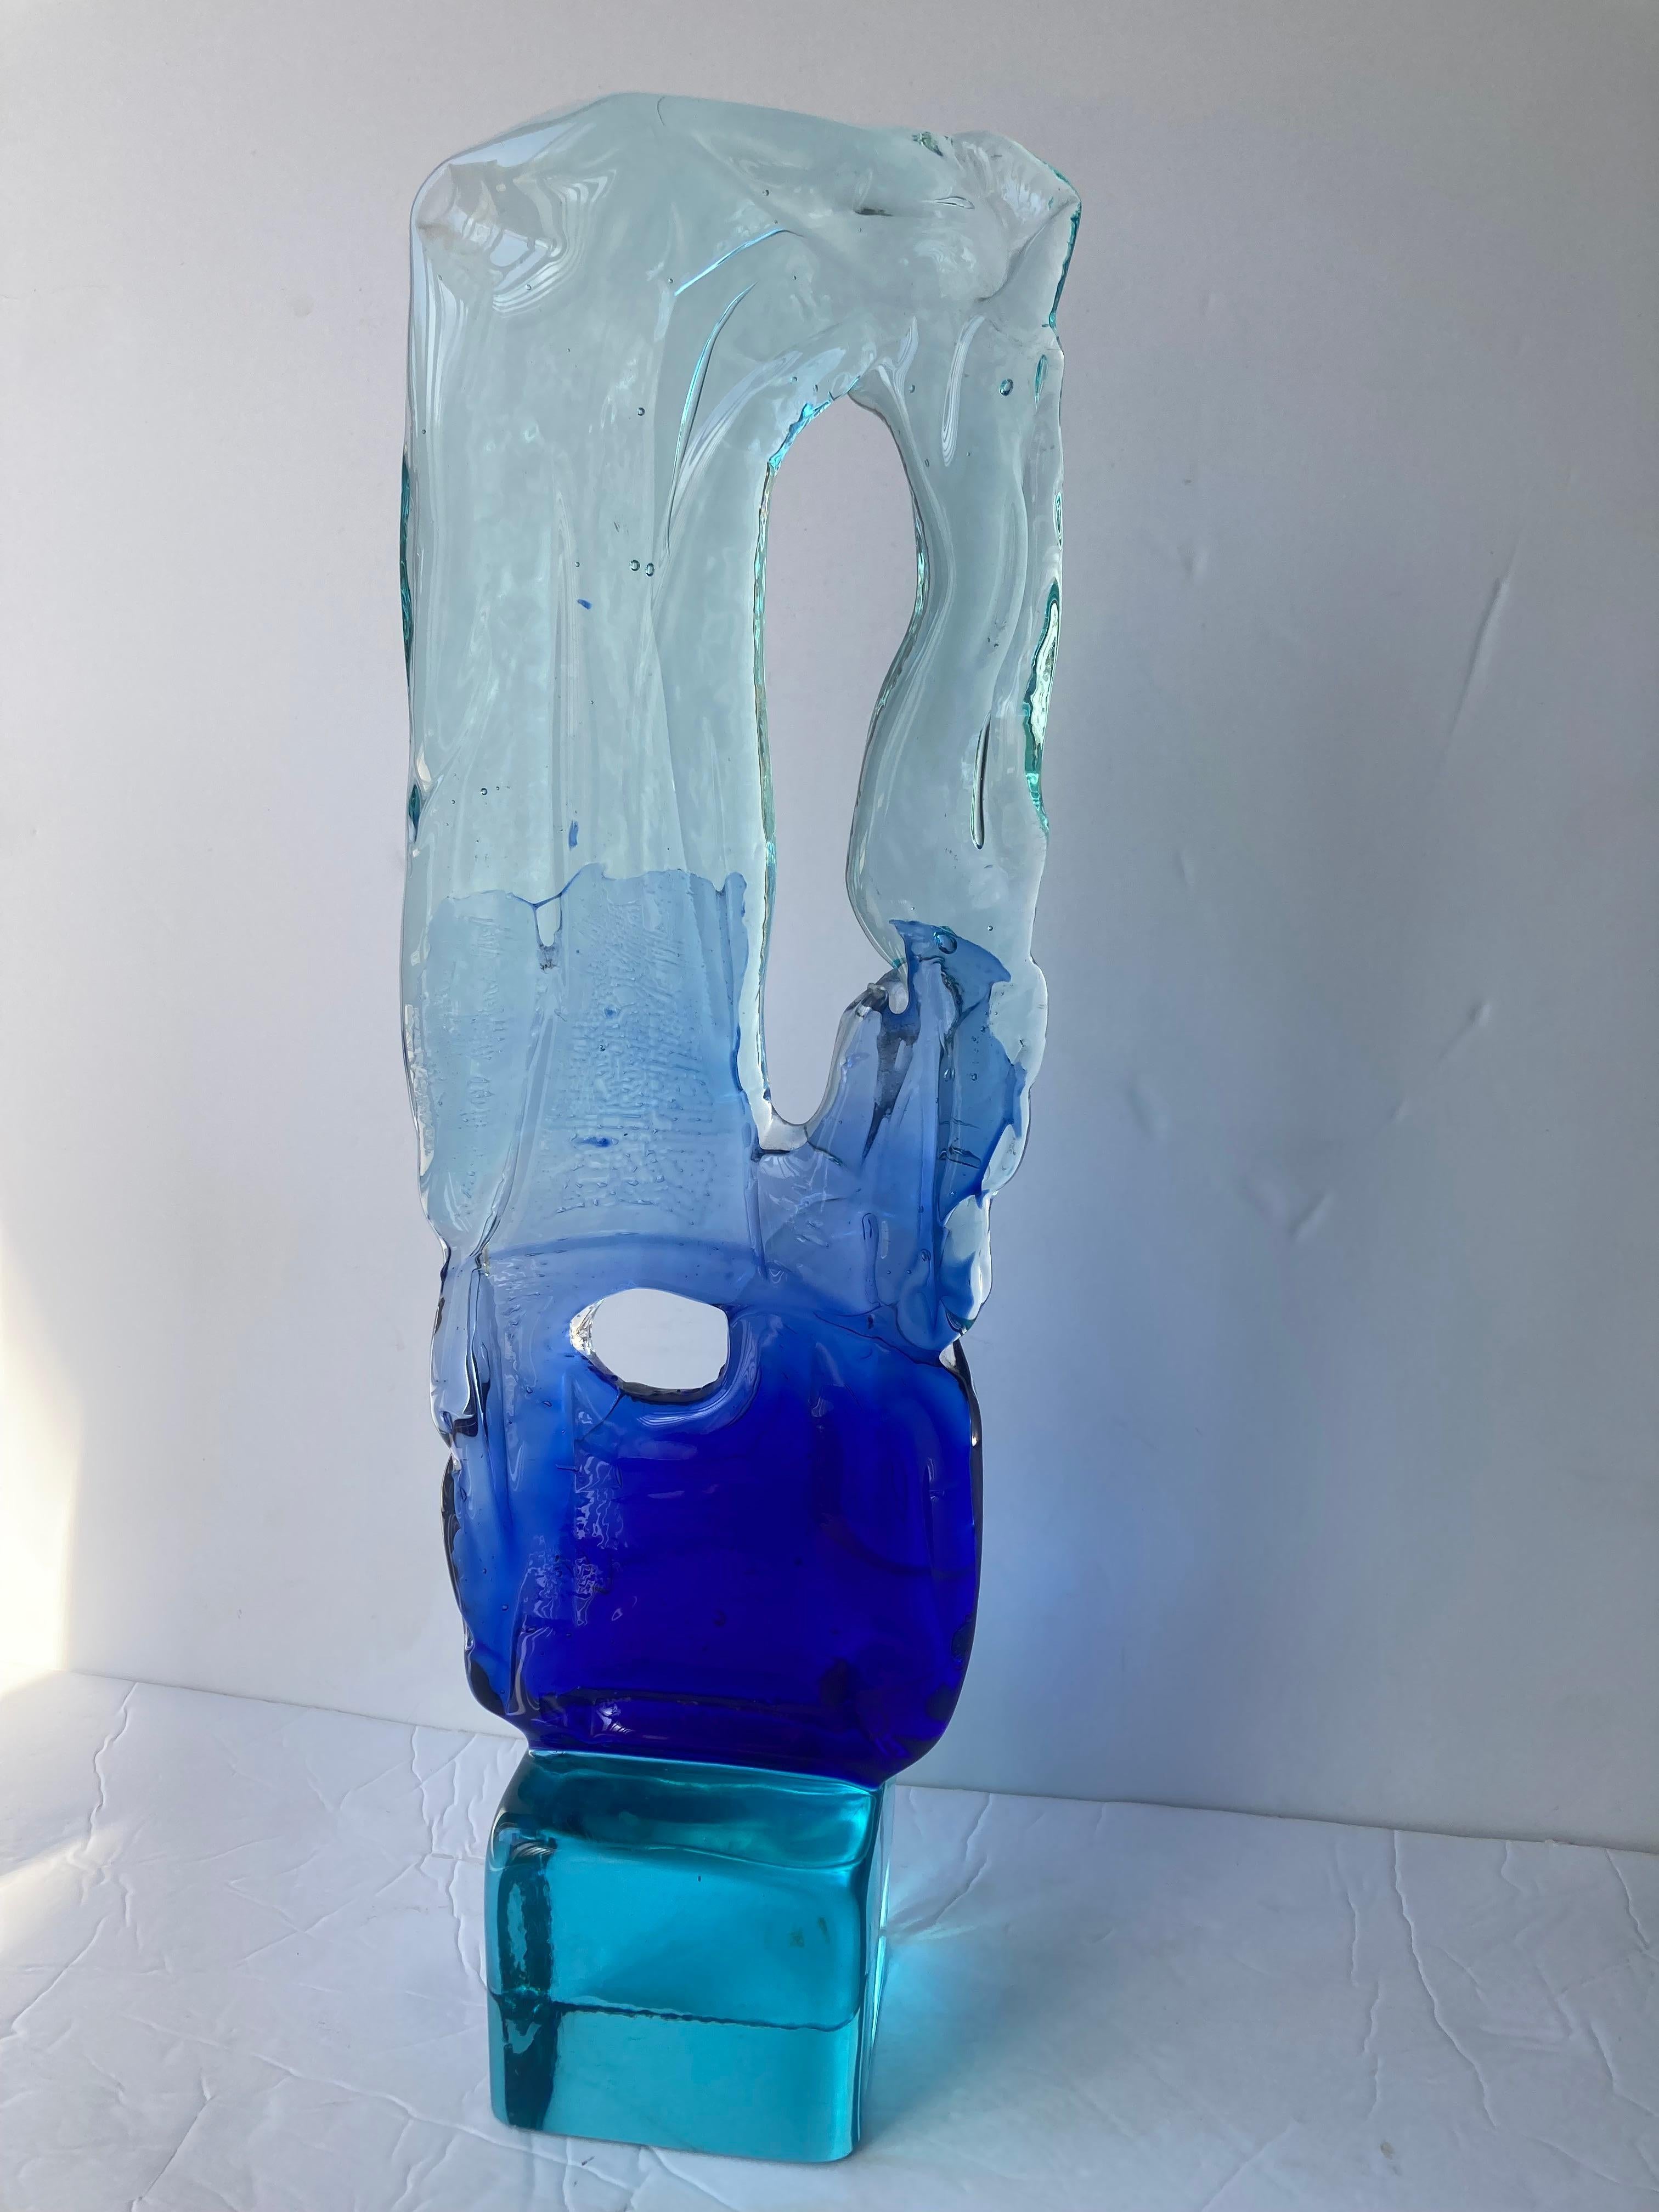 Beautiful abstract Murano glass sculpture by the very well known Murano Master Luciano Gaspari .